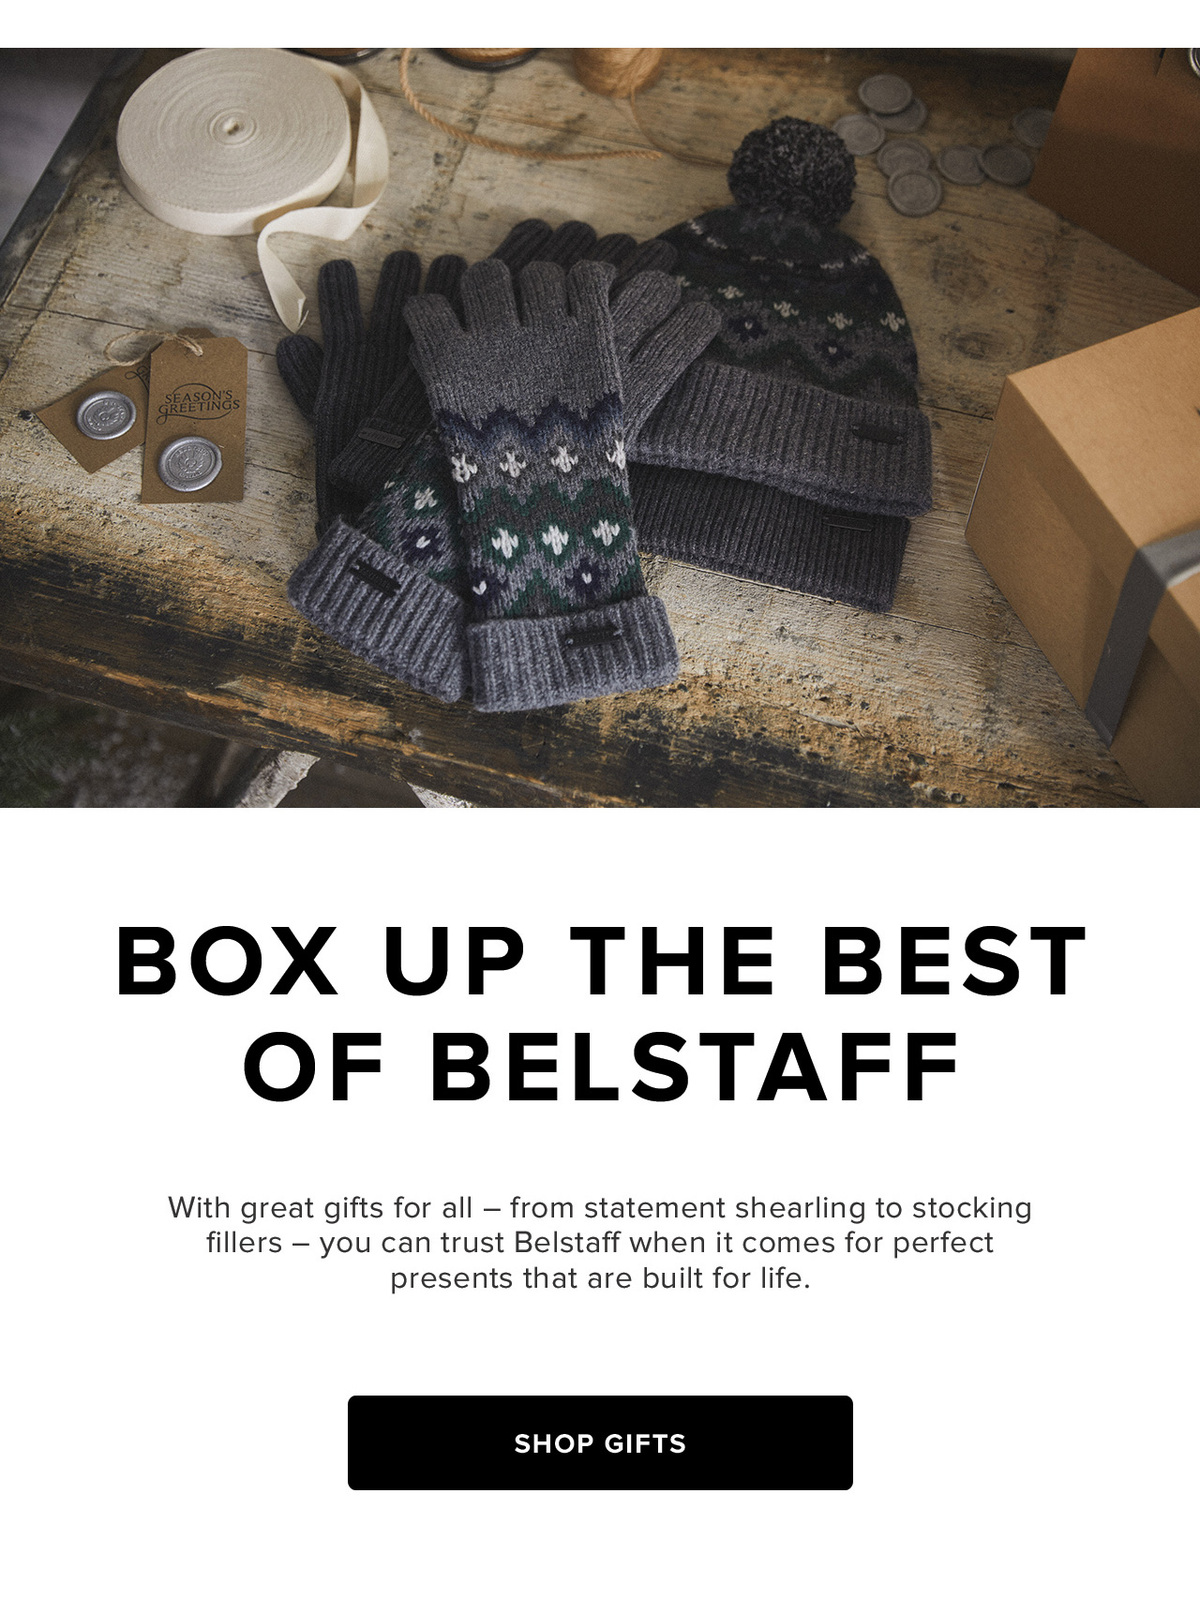 With great gifts for all - from statement shearling to stocking fillers - you can trust Belstaff when it comes for perfect presents that are built for life.